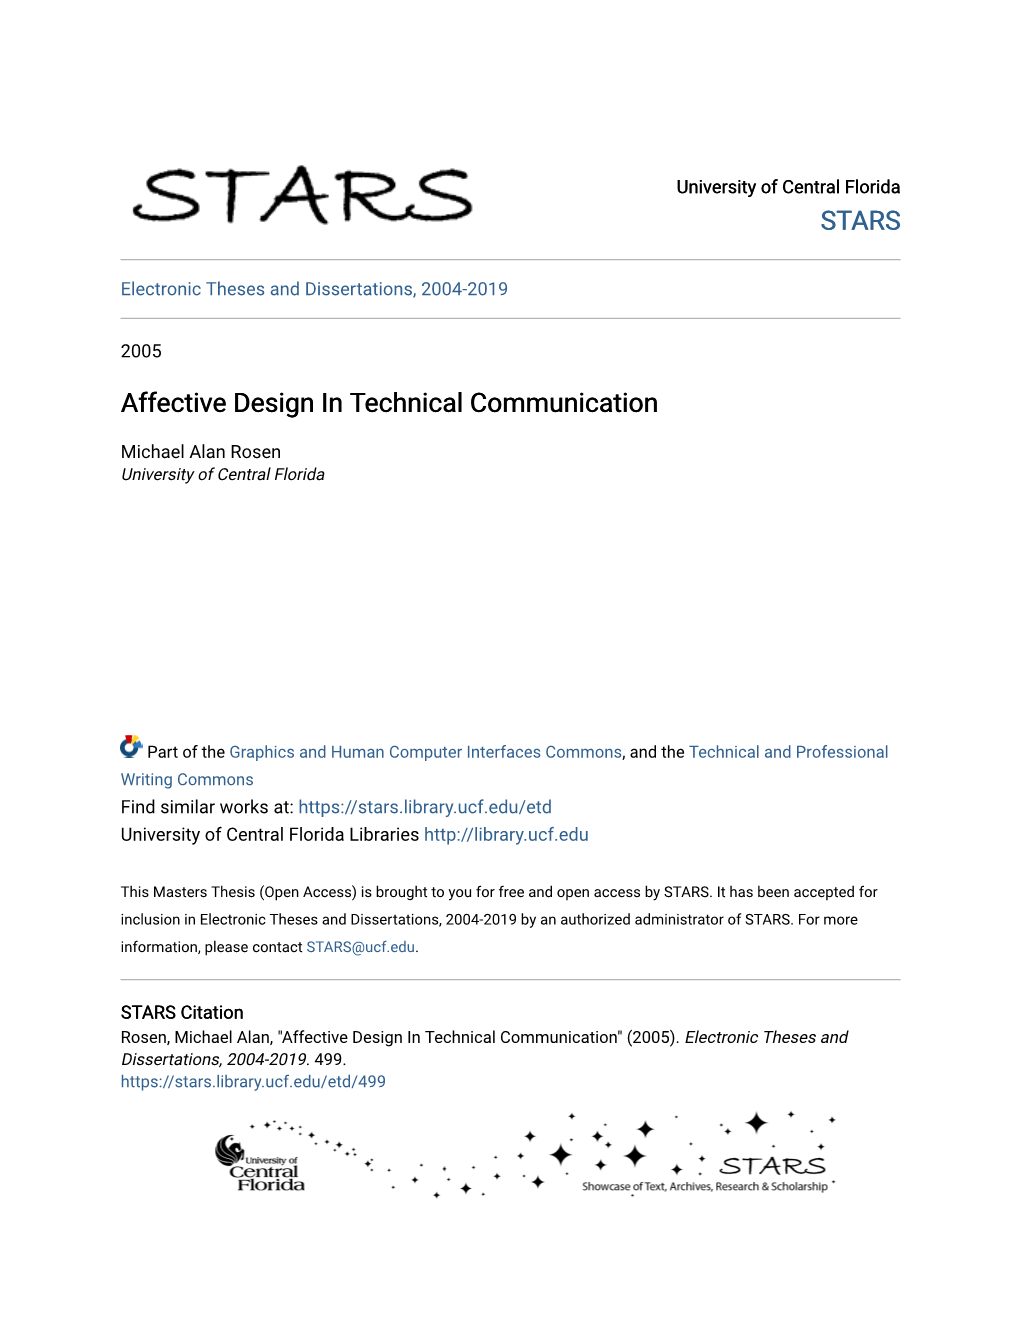 Affective Design in Technical Communication